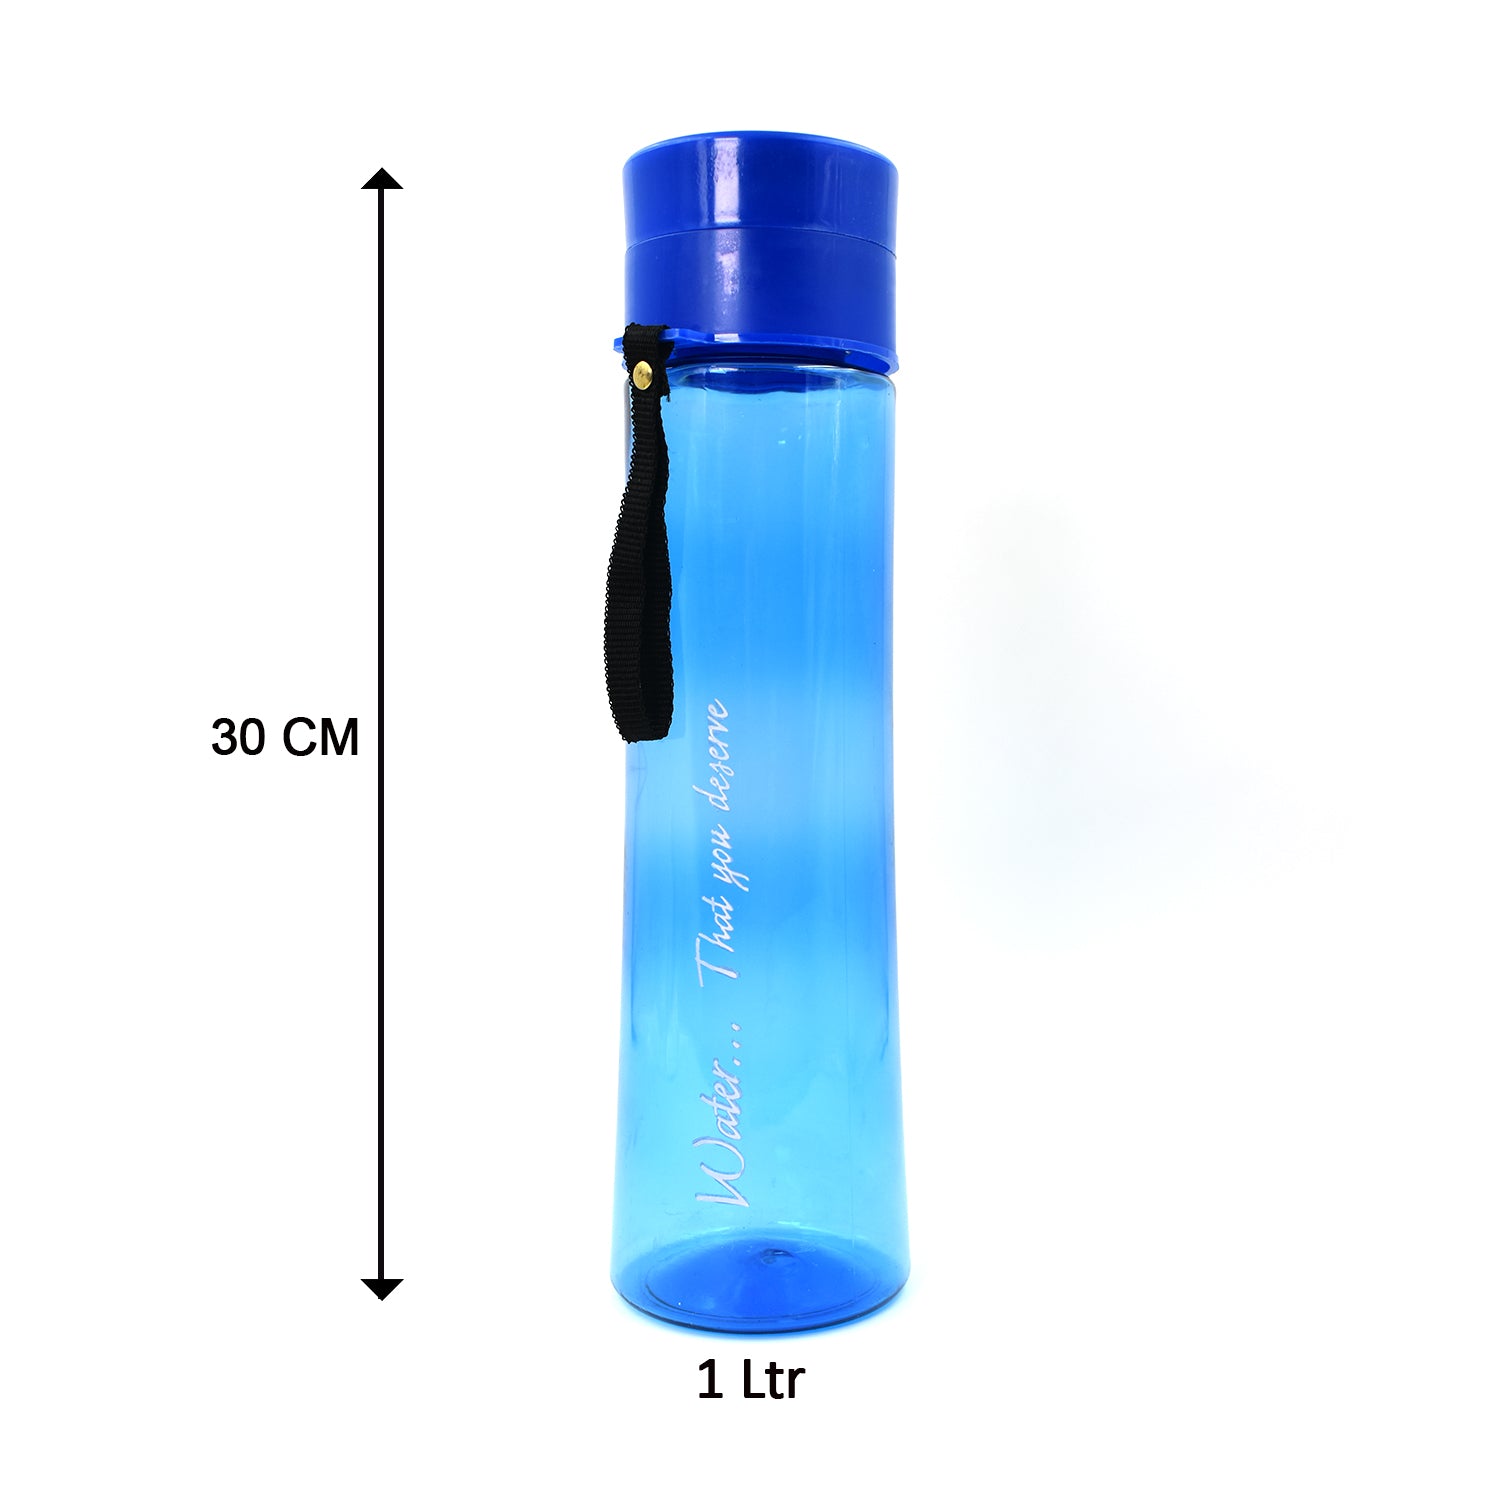 2716 Unbreakable, Leakproof, Durable, BPA Free, Non-Toxic Plastic Water Bottles, 1 Litre (Pack of 3, Assorted Color)